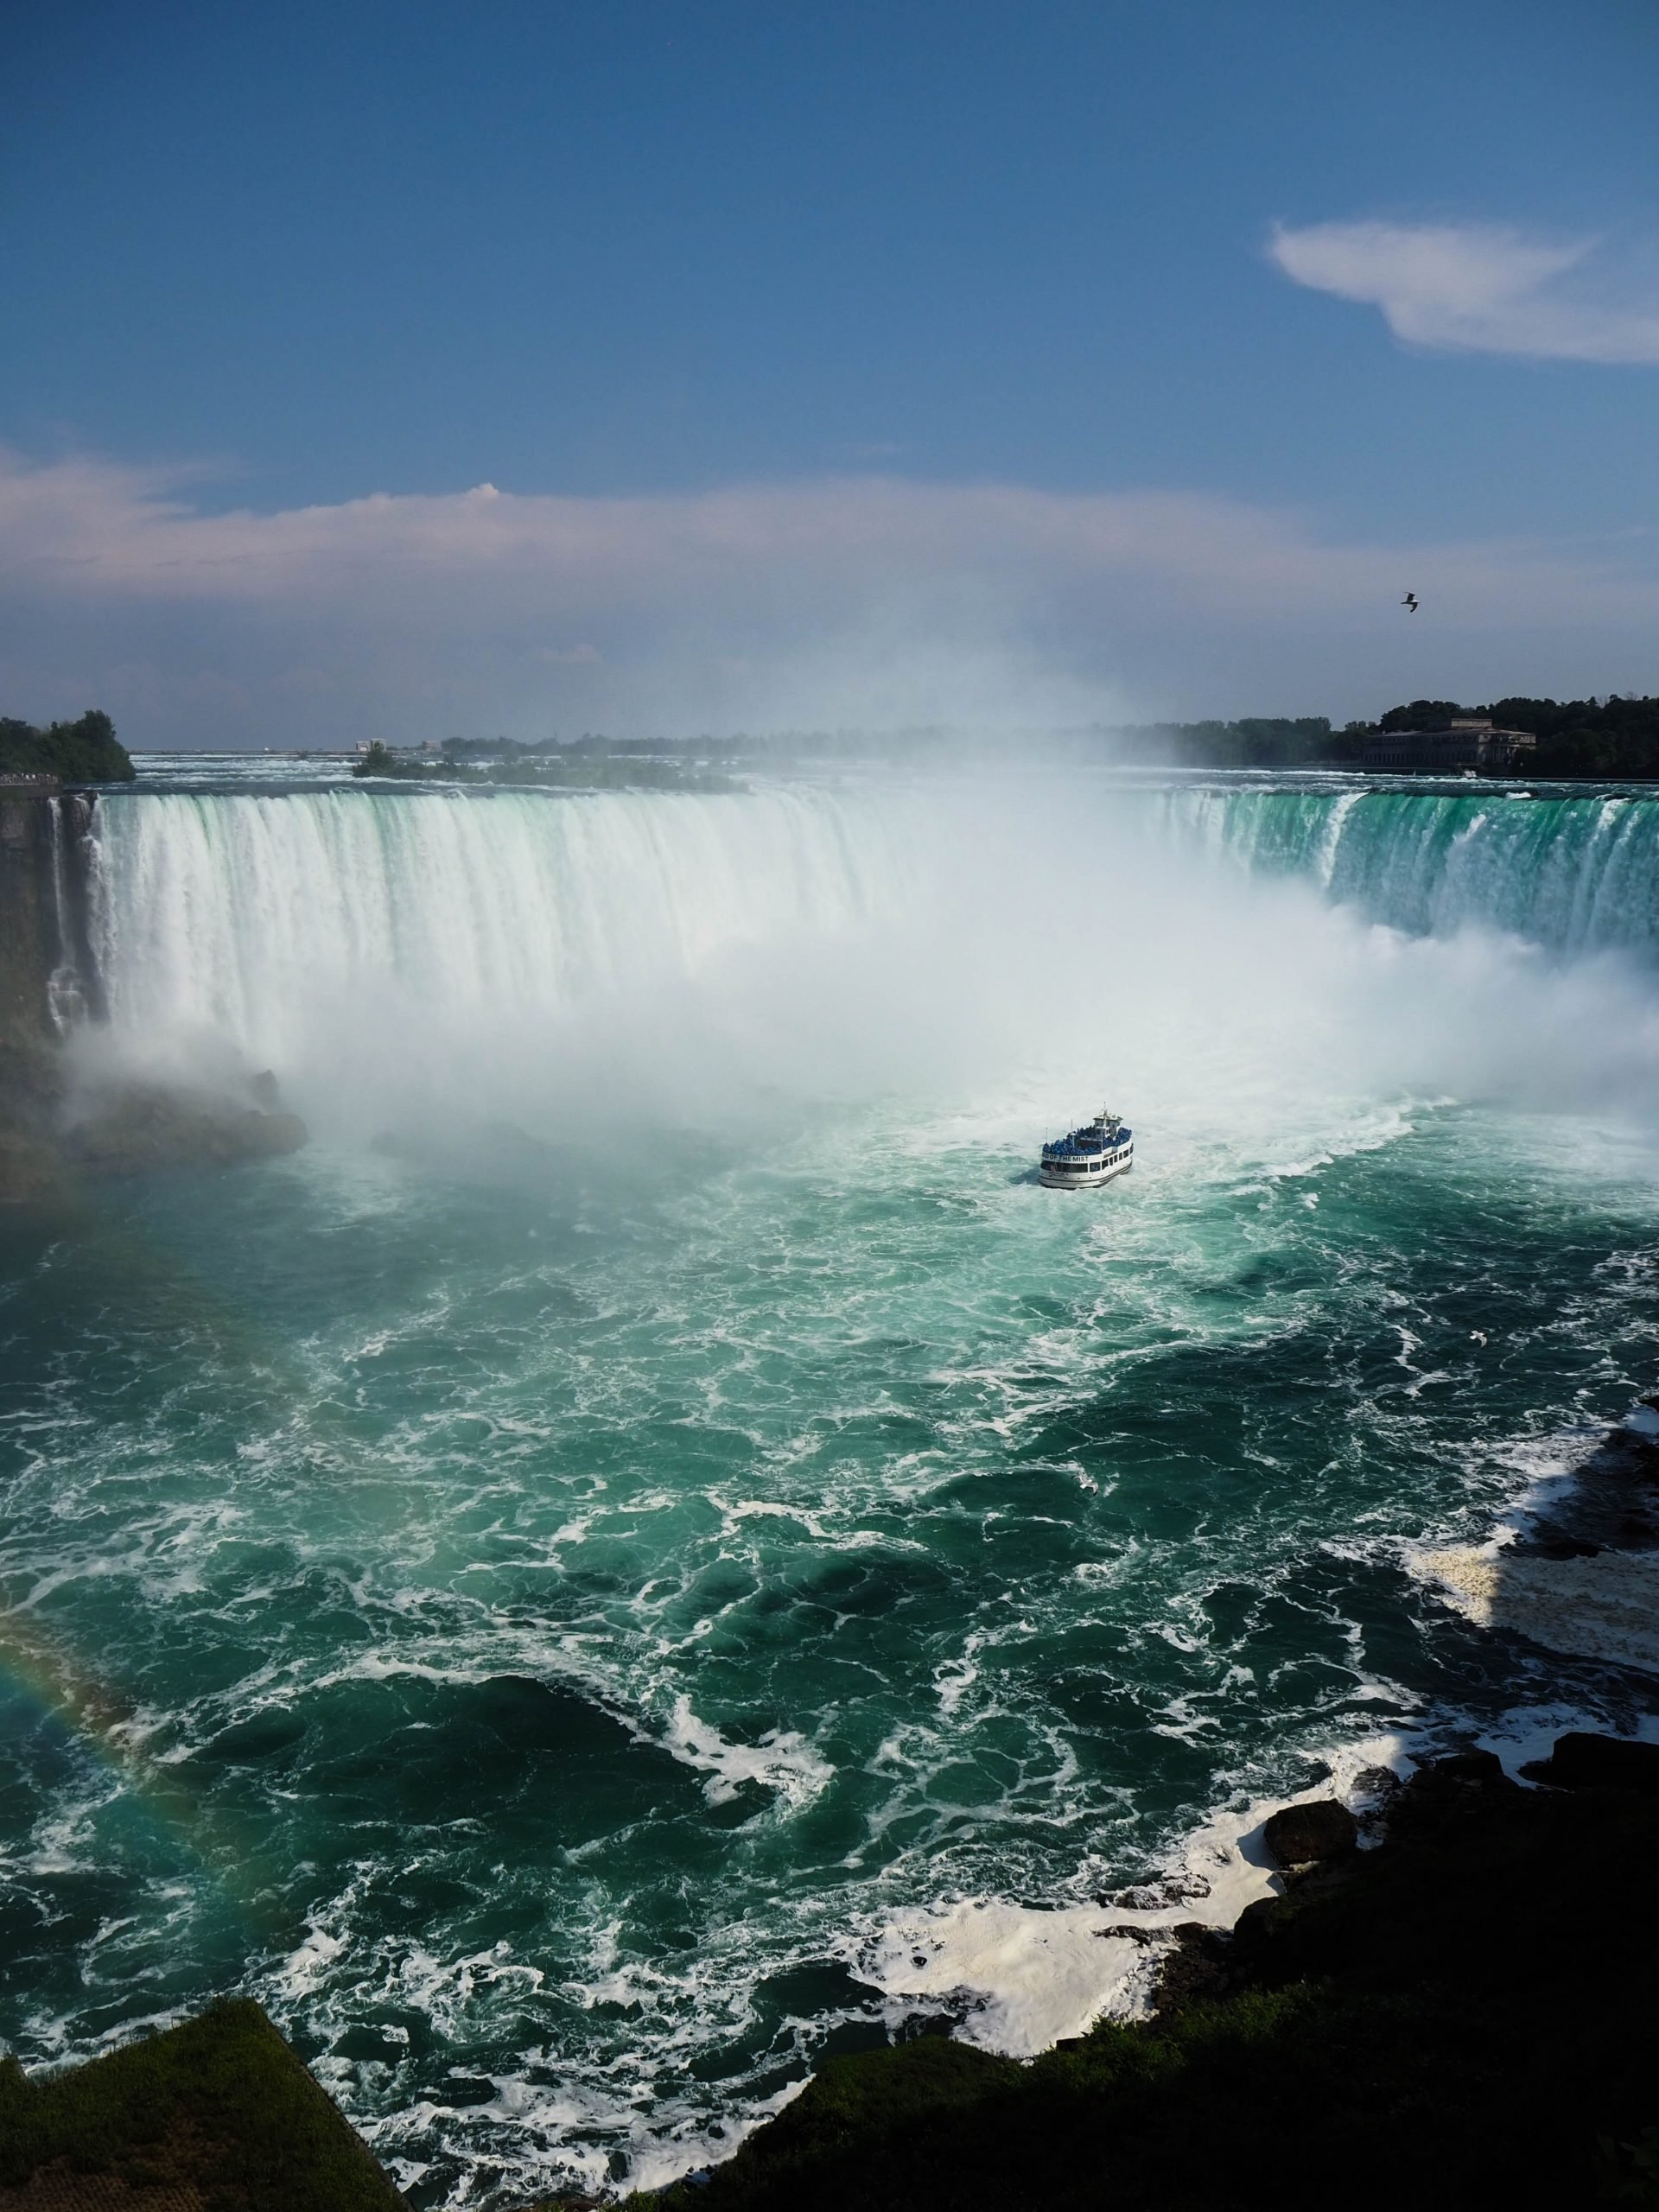 How To Get From Toronto Airport To Niagara Falls - All Possible Ways, cheapest way from Toronto airport to Niagara Falls, toronto airport to Niagara Falls, Toronto Airport Bus To Niagara Falls